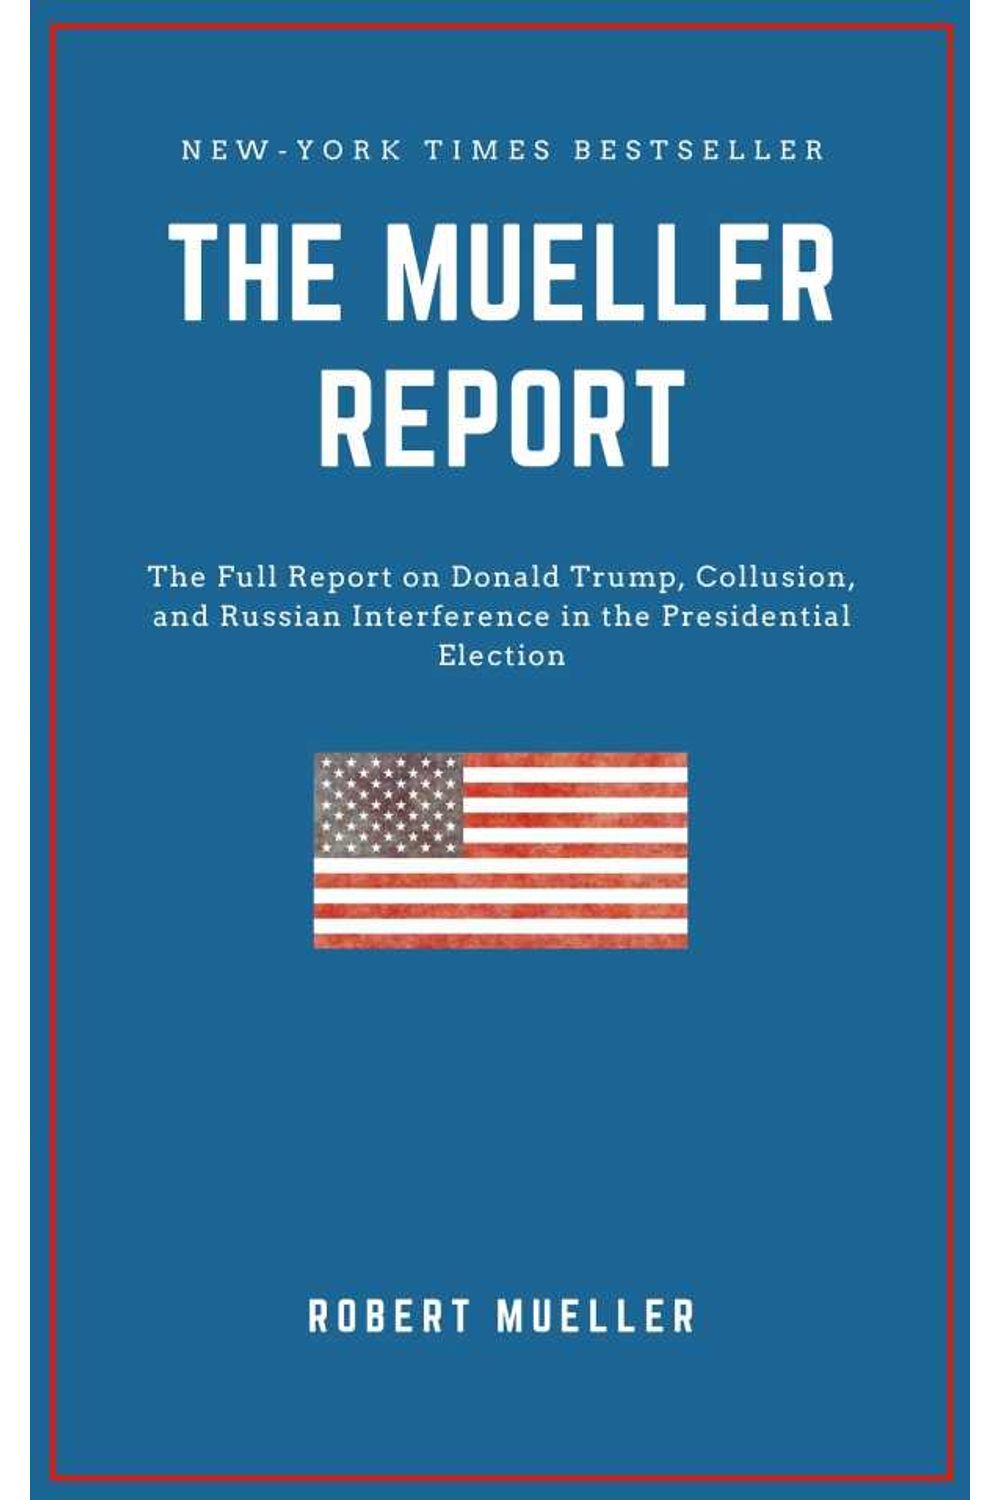 bw-the-mueller-report-the-full-report-on-donald-trump-collusion-and-russian-interference-in-the-2016-us-presidential-election-ja-9782291064183